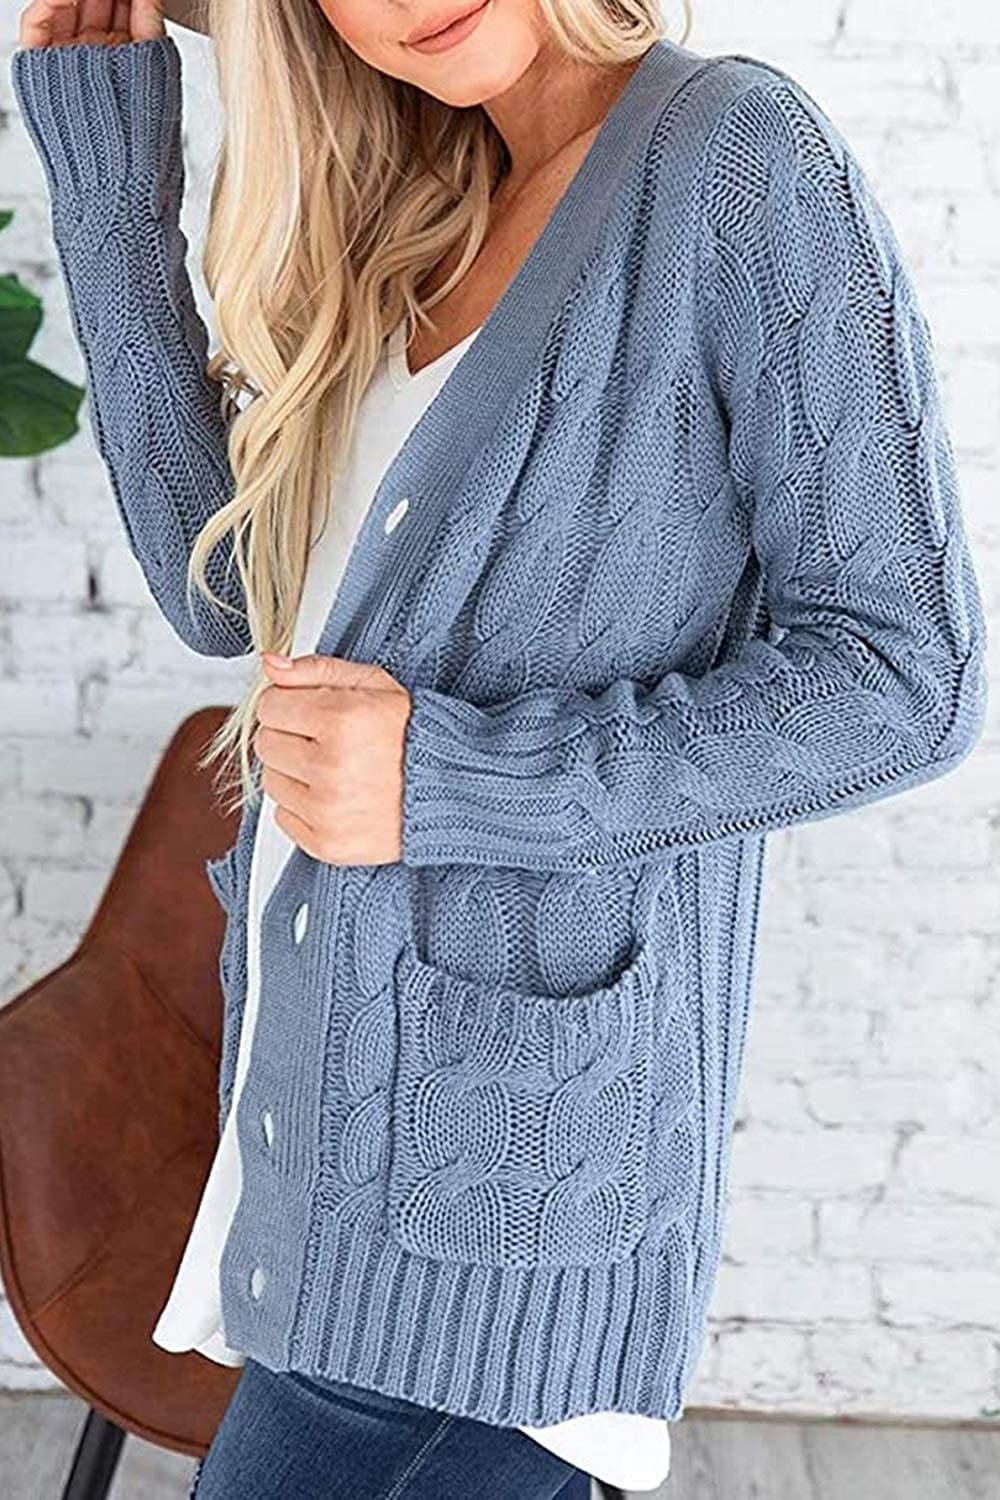 GIKING Womens V-Neck Button Down Knitwear Long Sleeve Basic Knit Cardigan Sweater with Pockets